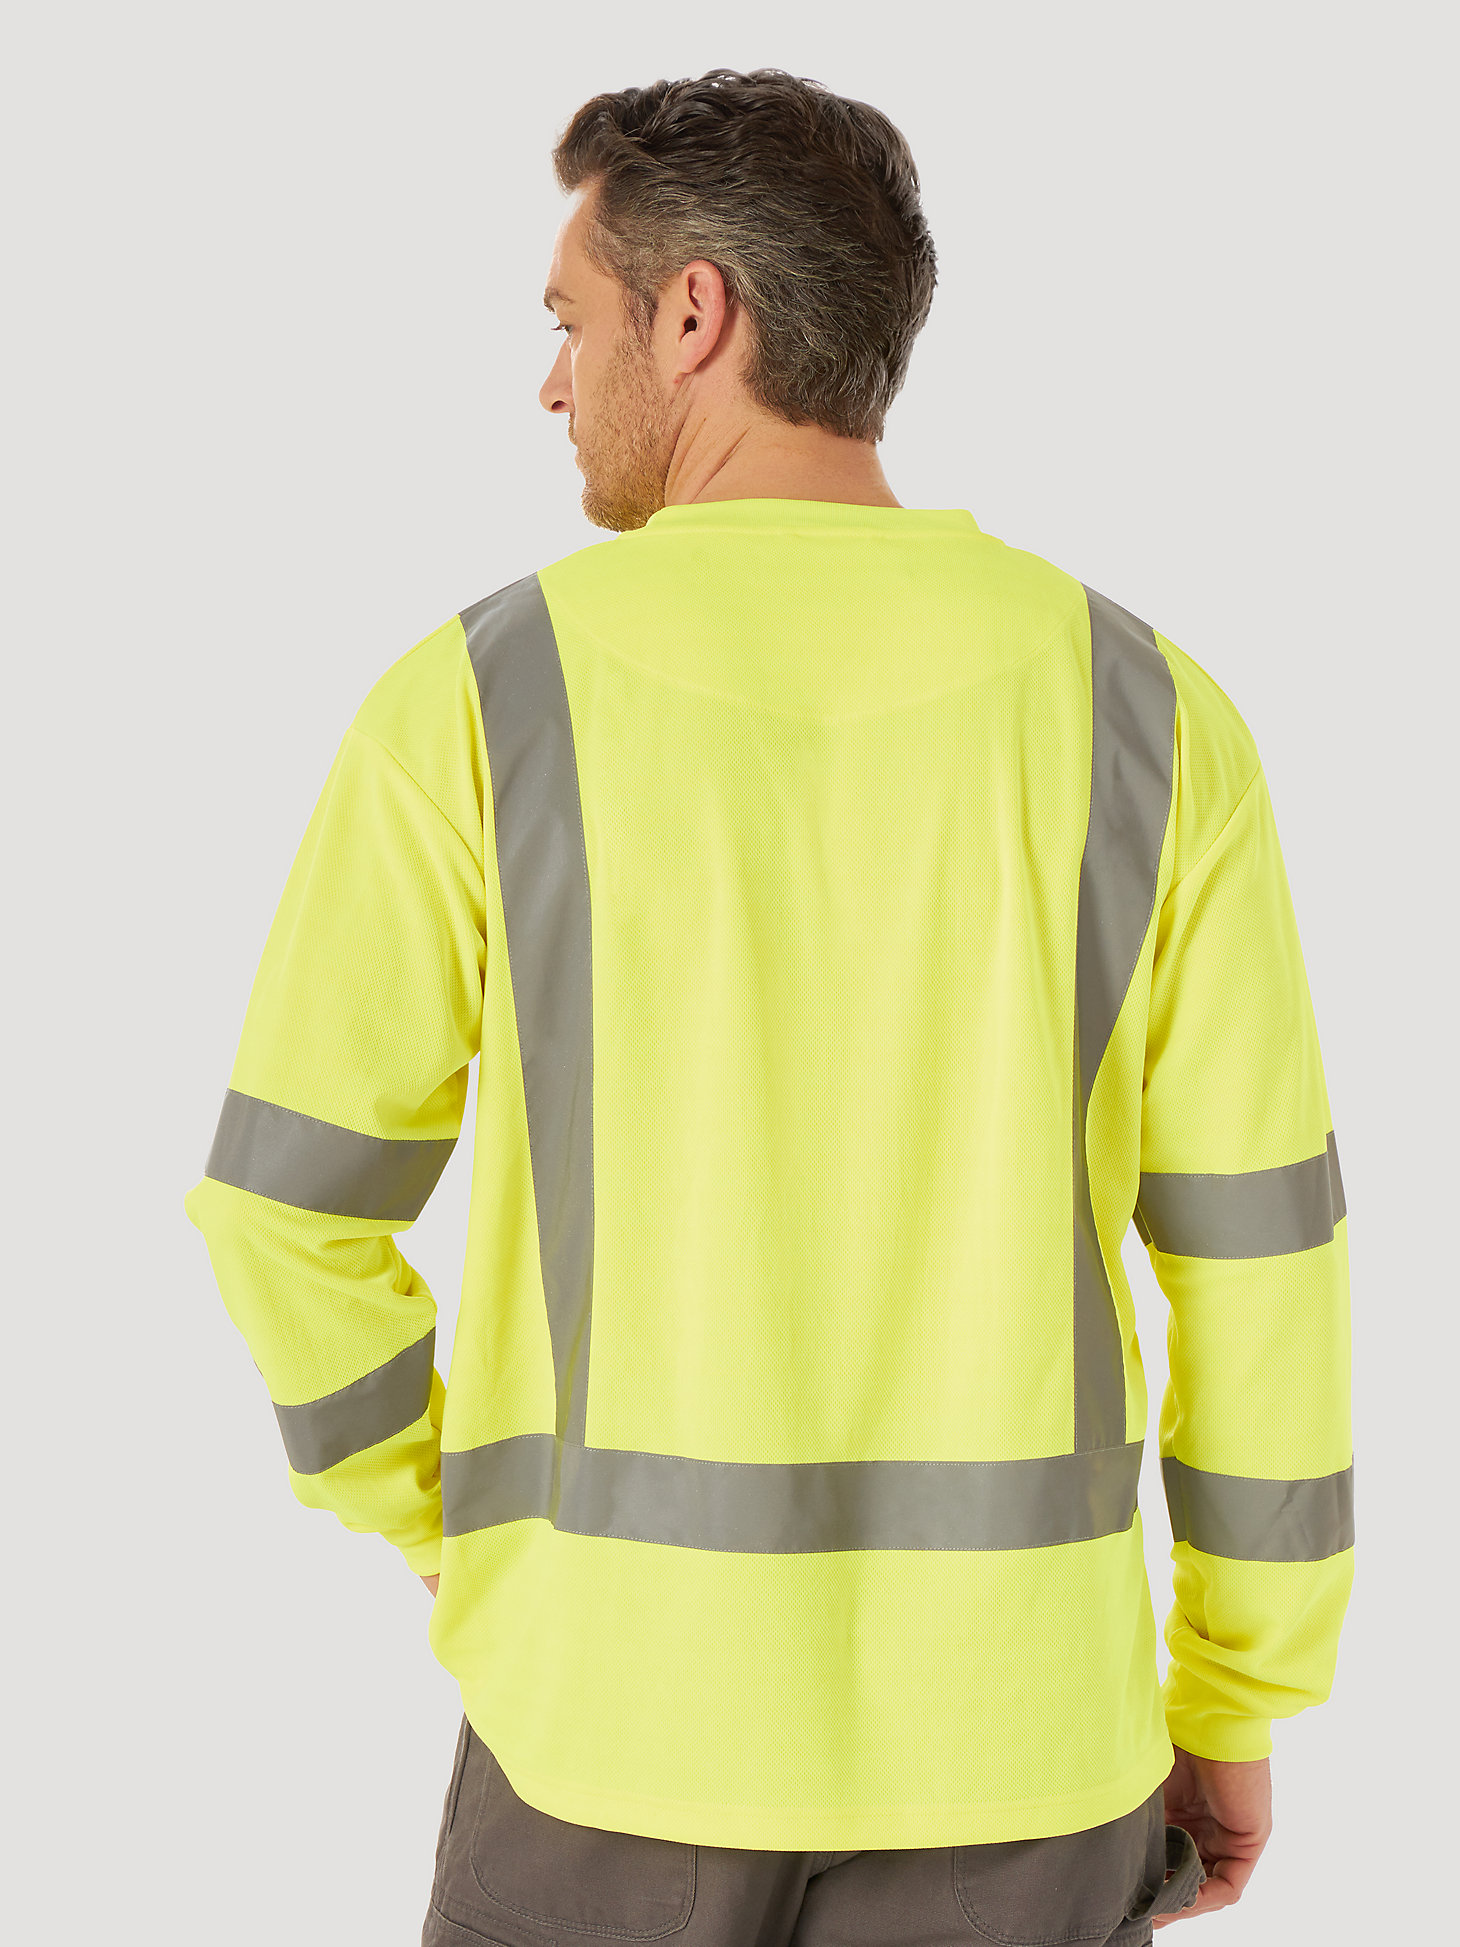 Wrangler® RIGGS Workwear® Long Sleeve High Visibility T-Shirt in Safety Green alternative view 1